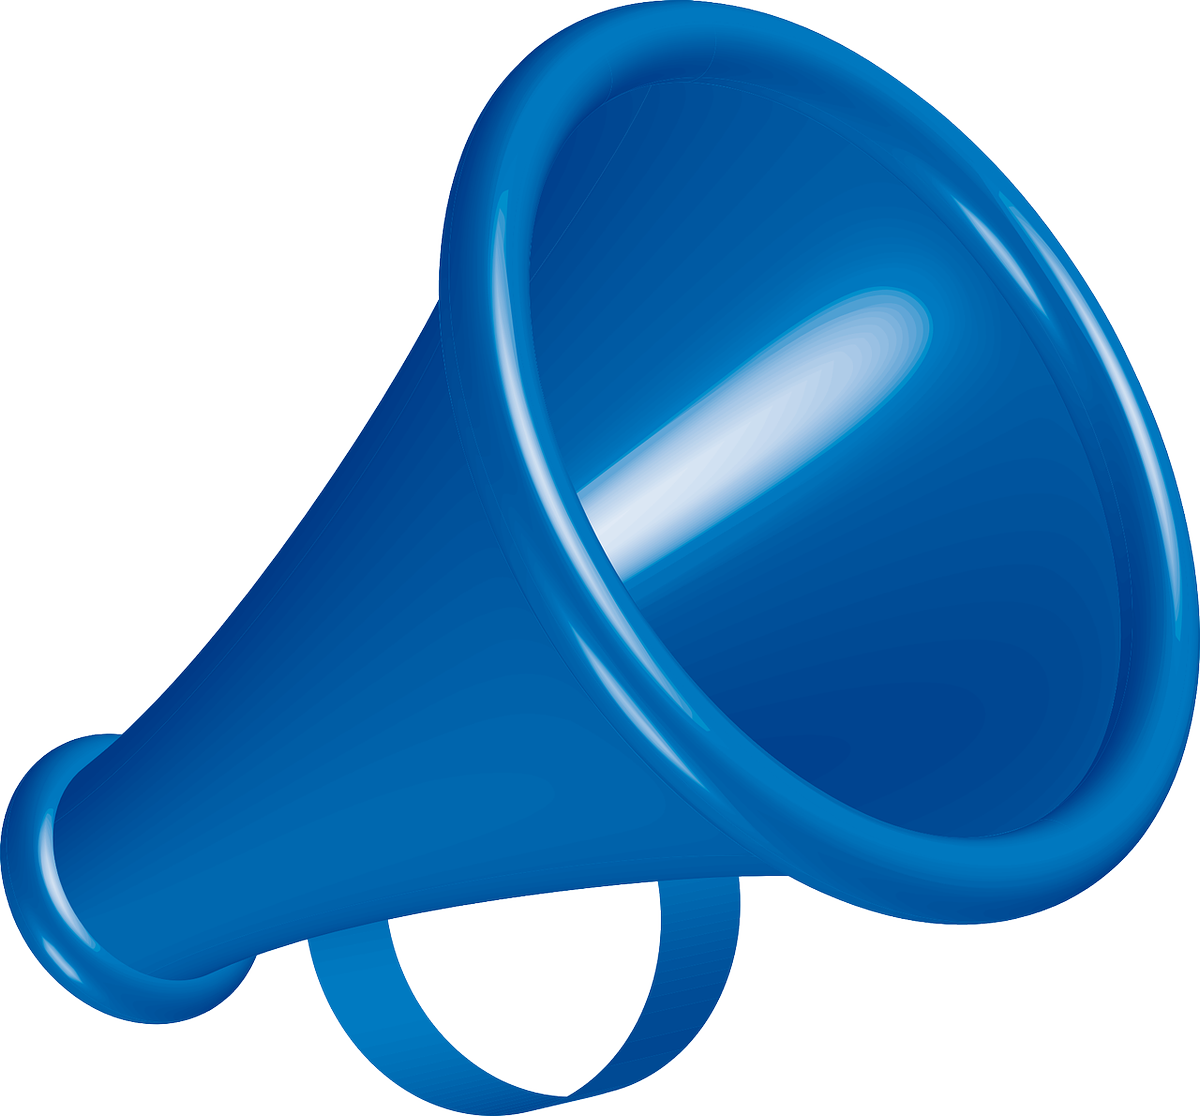 Sound Horn PNG High Quality Image